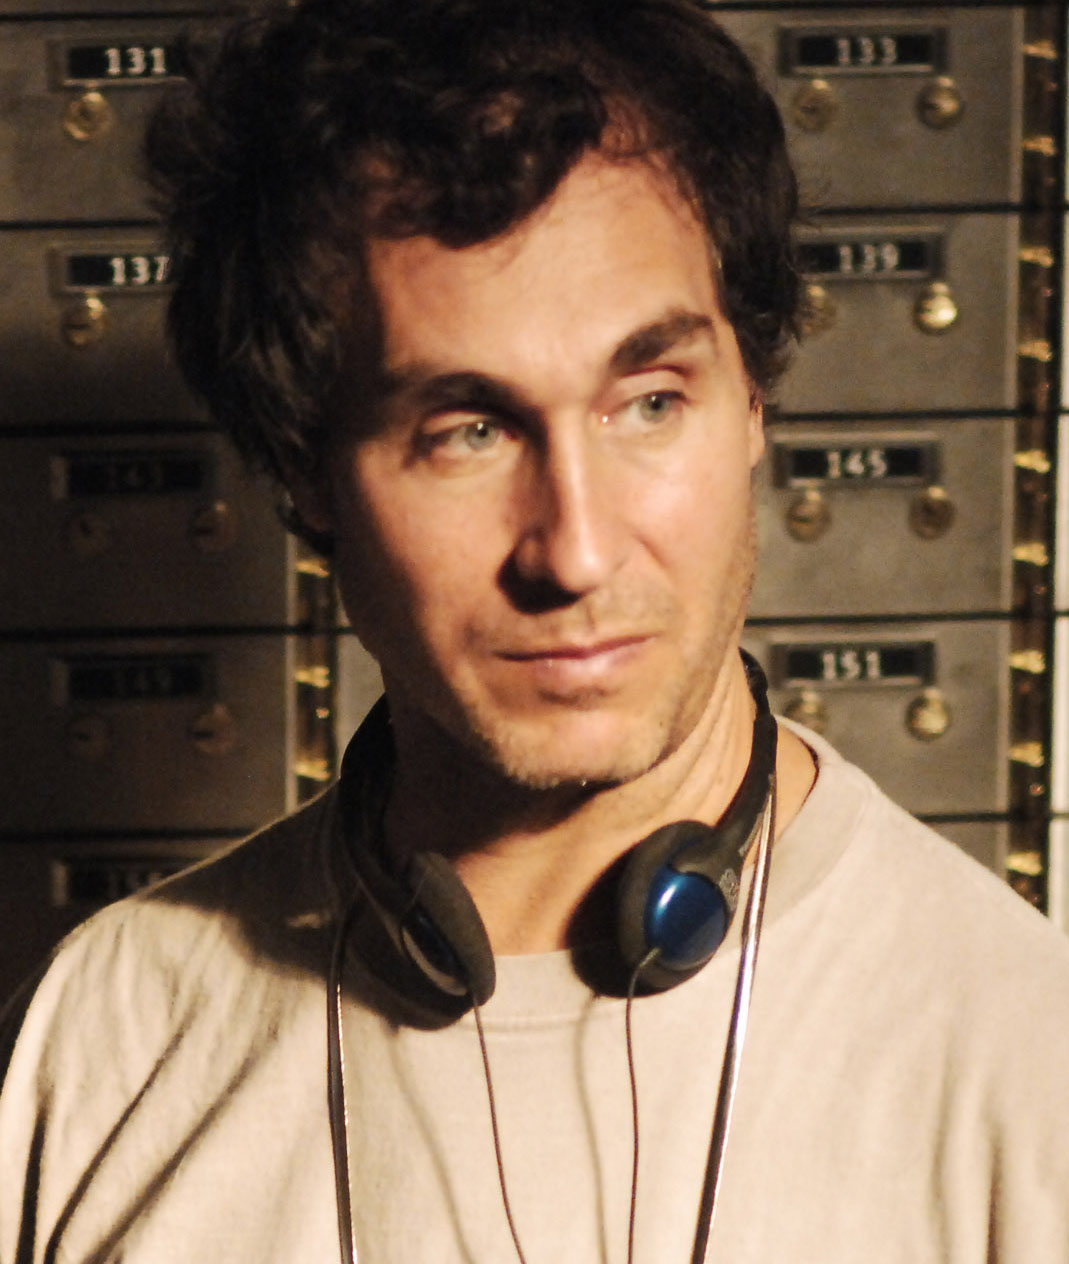 Doug Liman, director of films including The Bourne Identity, Swingers, Mr. and Mrs. Smith, and Go, will join writer Simon Kinberg to present the Ivy Film ... - 06-128a